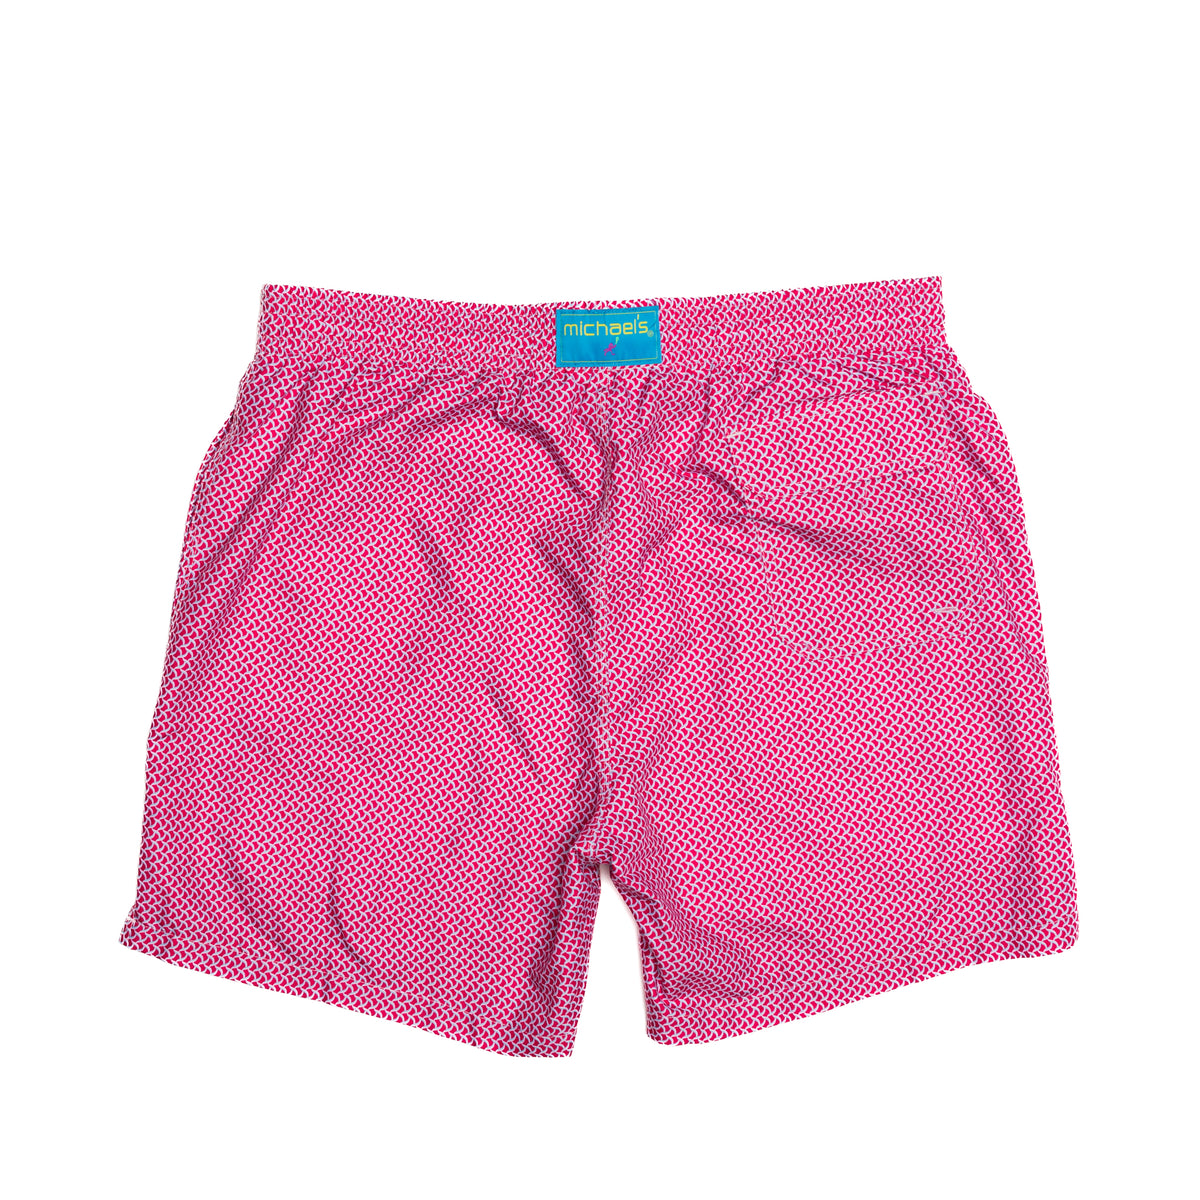 Coral/turquoise swim trunks with wave pattern for boys, back view